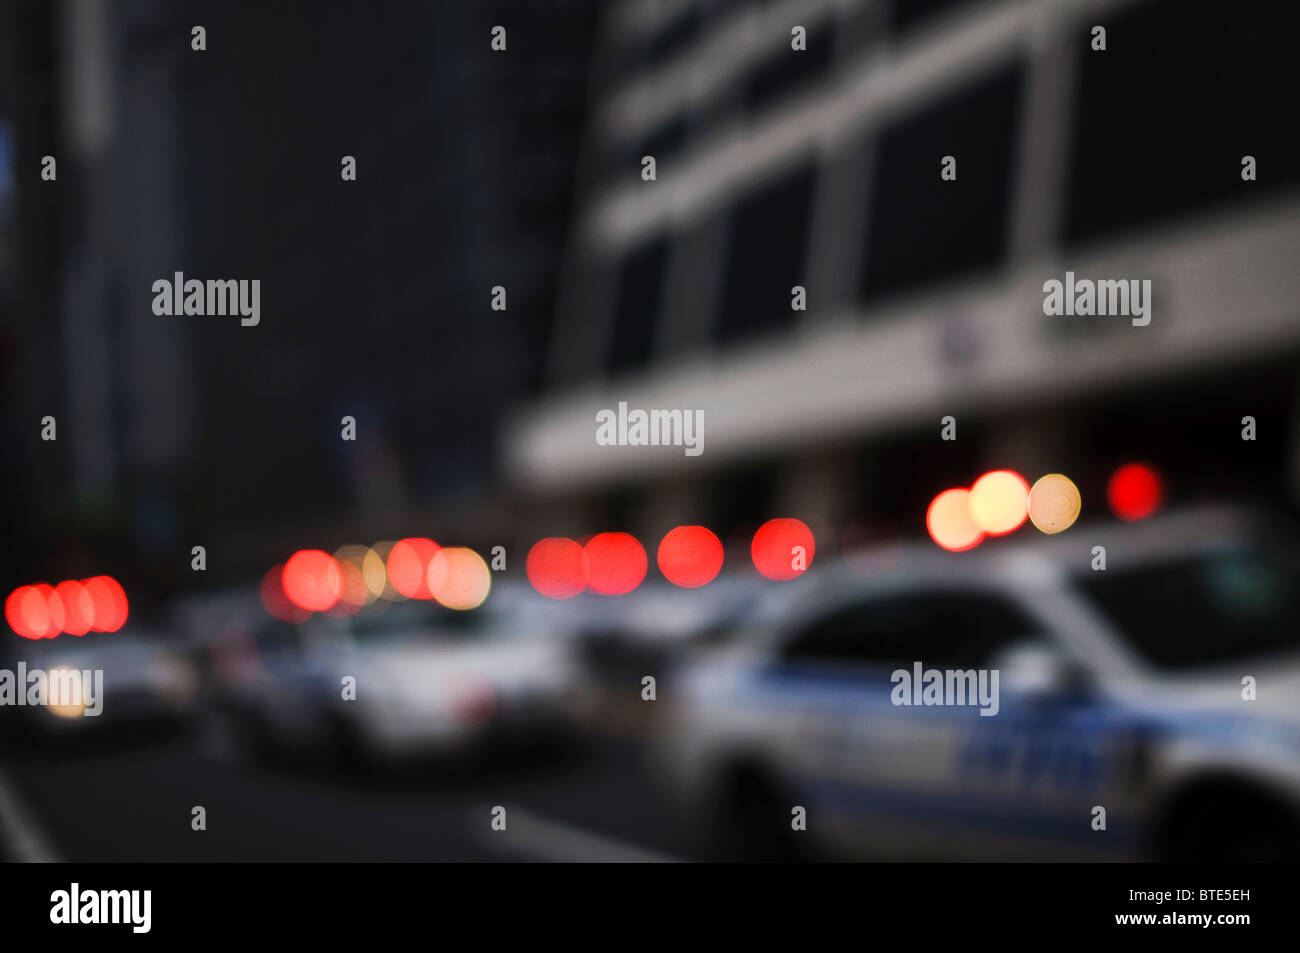 Police cars in New York City with sirens screaming and lights flashing. Image is deliberately out of focus. Stock Photo